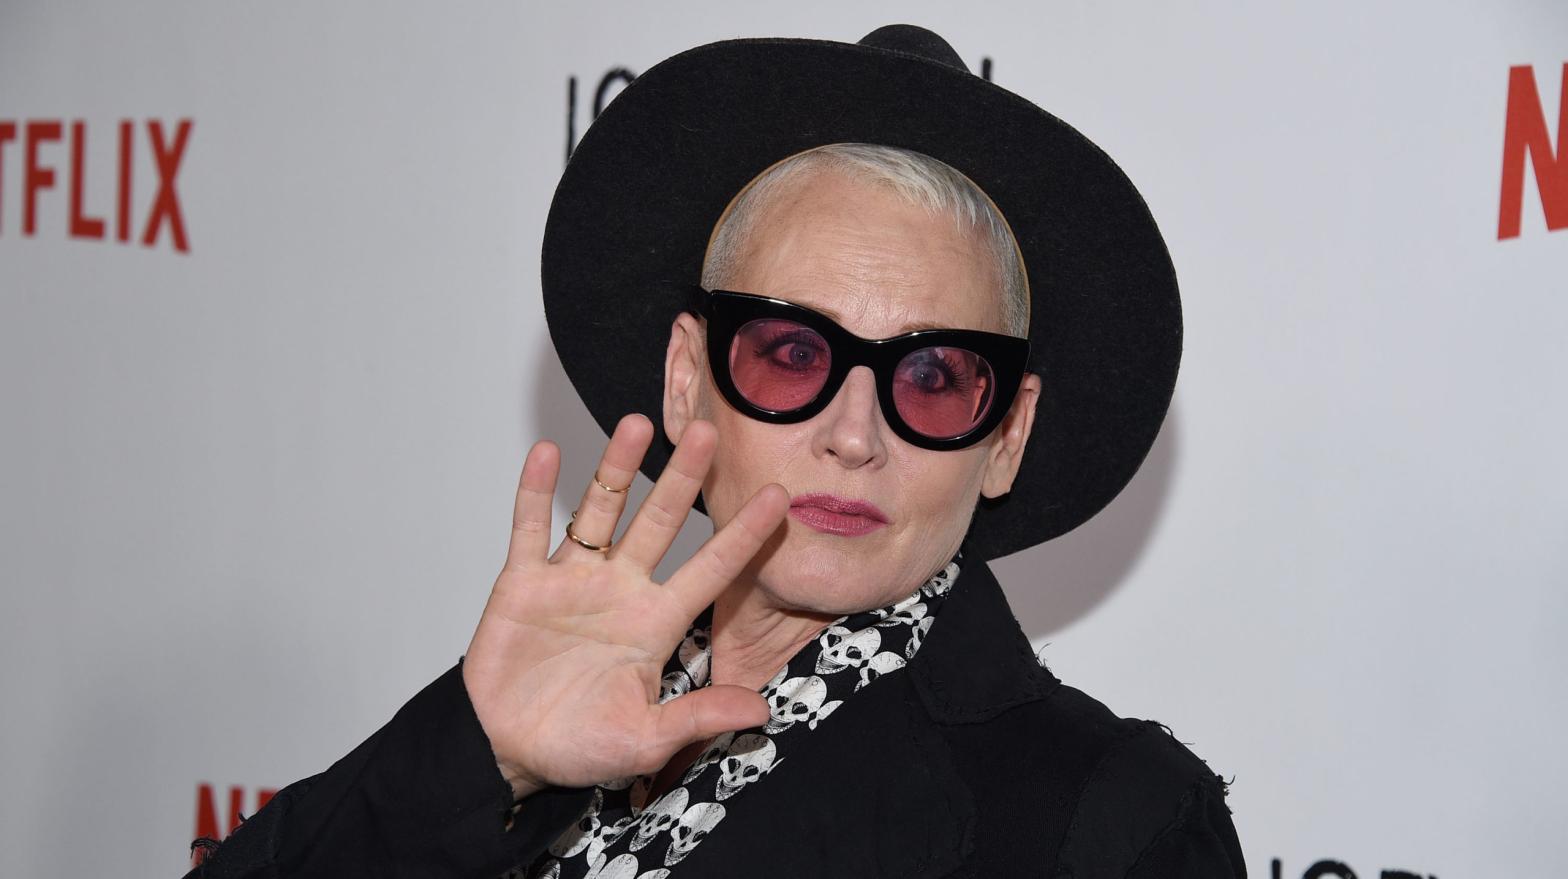 Lori Petty attends the Orange Is the New Black premiere on June 16, 2016 in New York City.  (Photo: Dimitrios Kambouris, Getty Images)